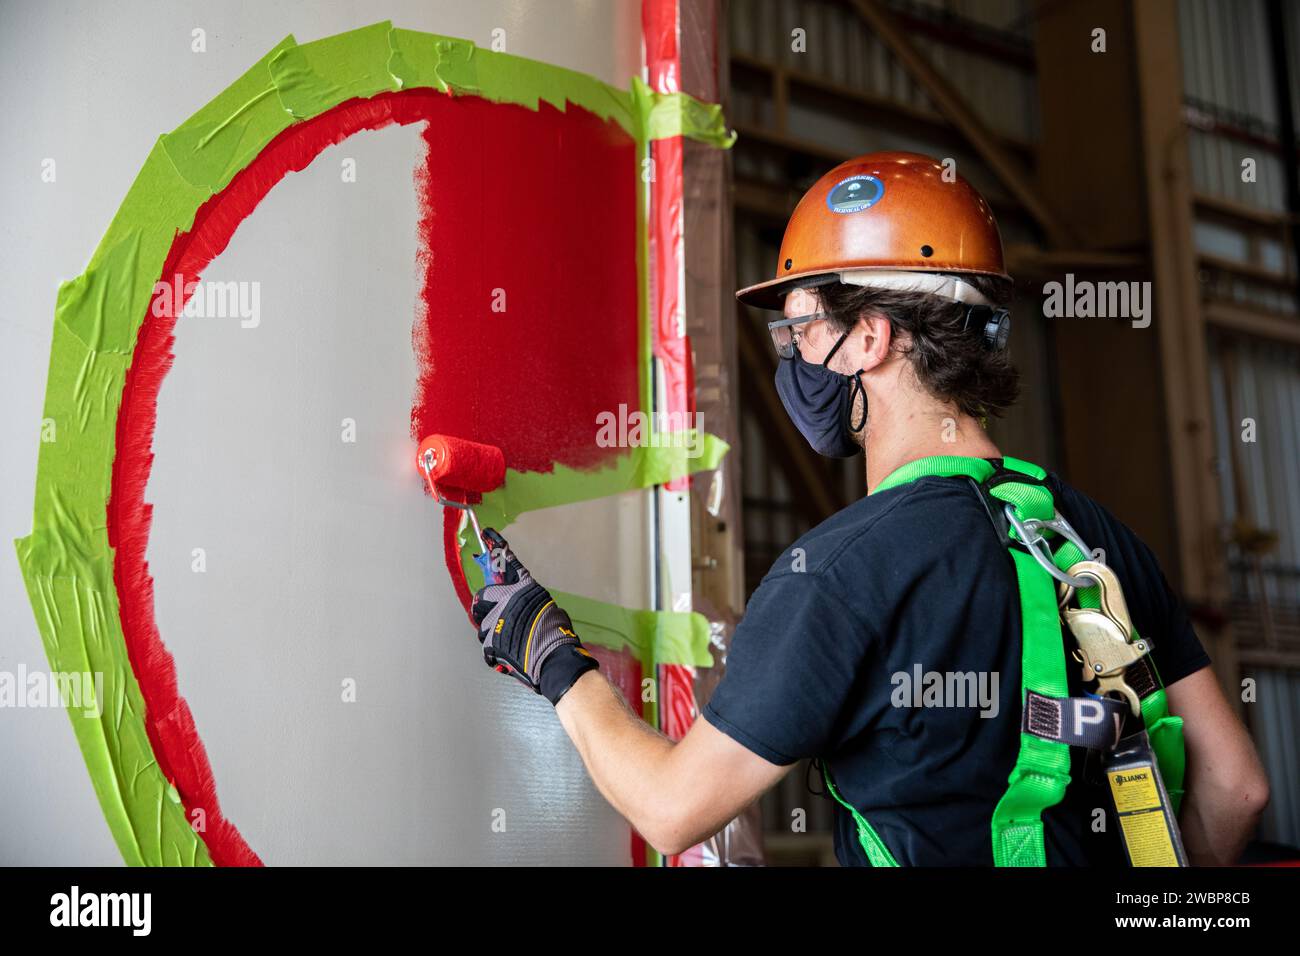 A worker with NASA’s Exploration Ground Systems (EGS) finishes the first coat of the bright red “worm” logo taking shape on the side of an Artemis I solid rocket booster segment inside the Rotation, Processing and Surge Facility (RPSF) at Kennedy Space Center in Florida. The EGS team used a laser projector to mask off the logo with tape, then painted the first coat of the iconic design. The booster segments will help propel the Space Launch System (SLS) rocket on Artemis I, a test of the Orion spacecraft and SLS as an integrated system ahead of crewed flights to the Moon. Northrop Grumman, whi Stock Photo